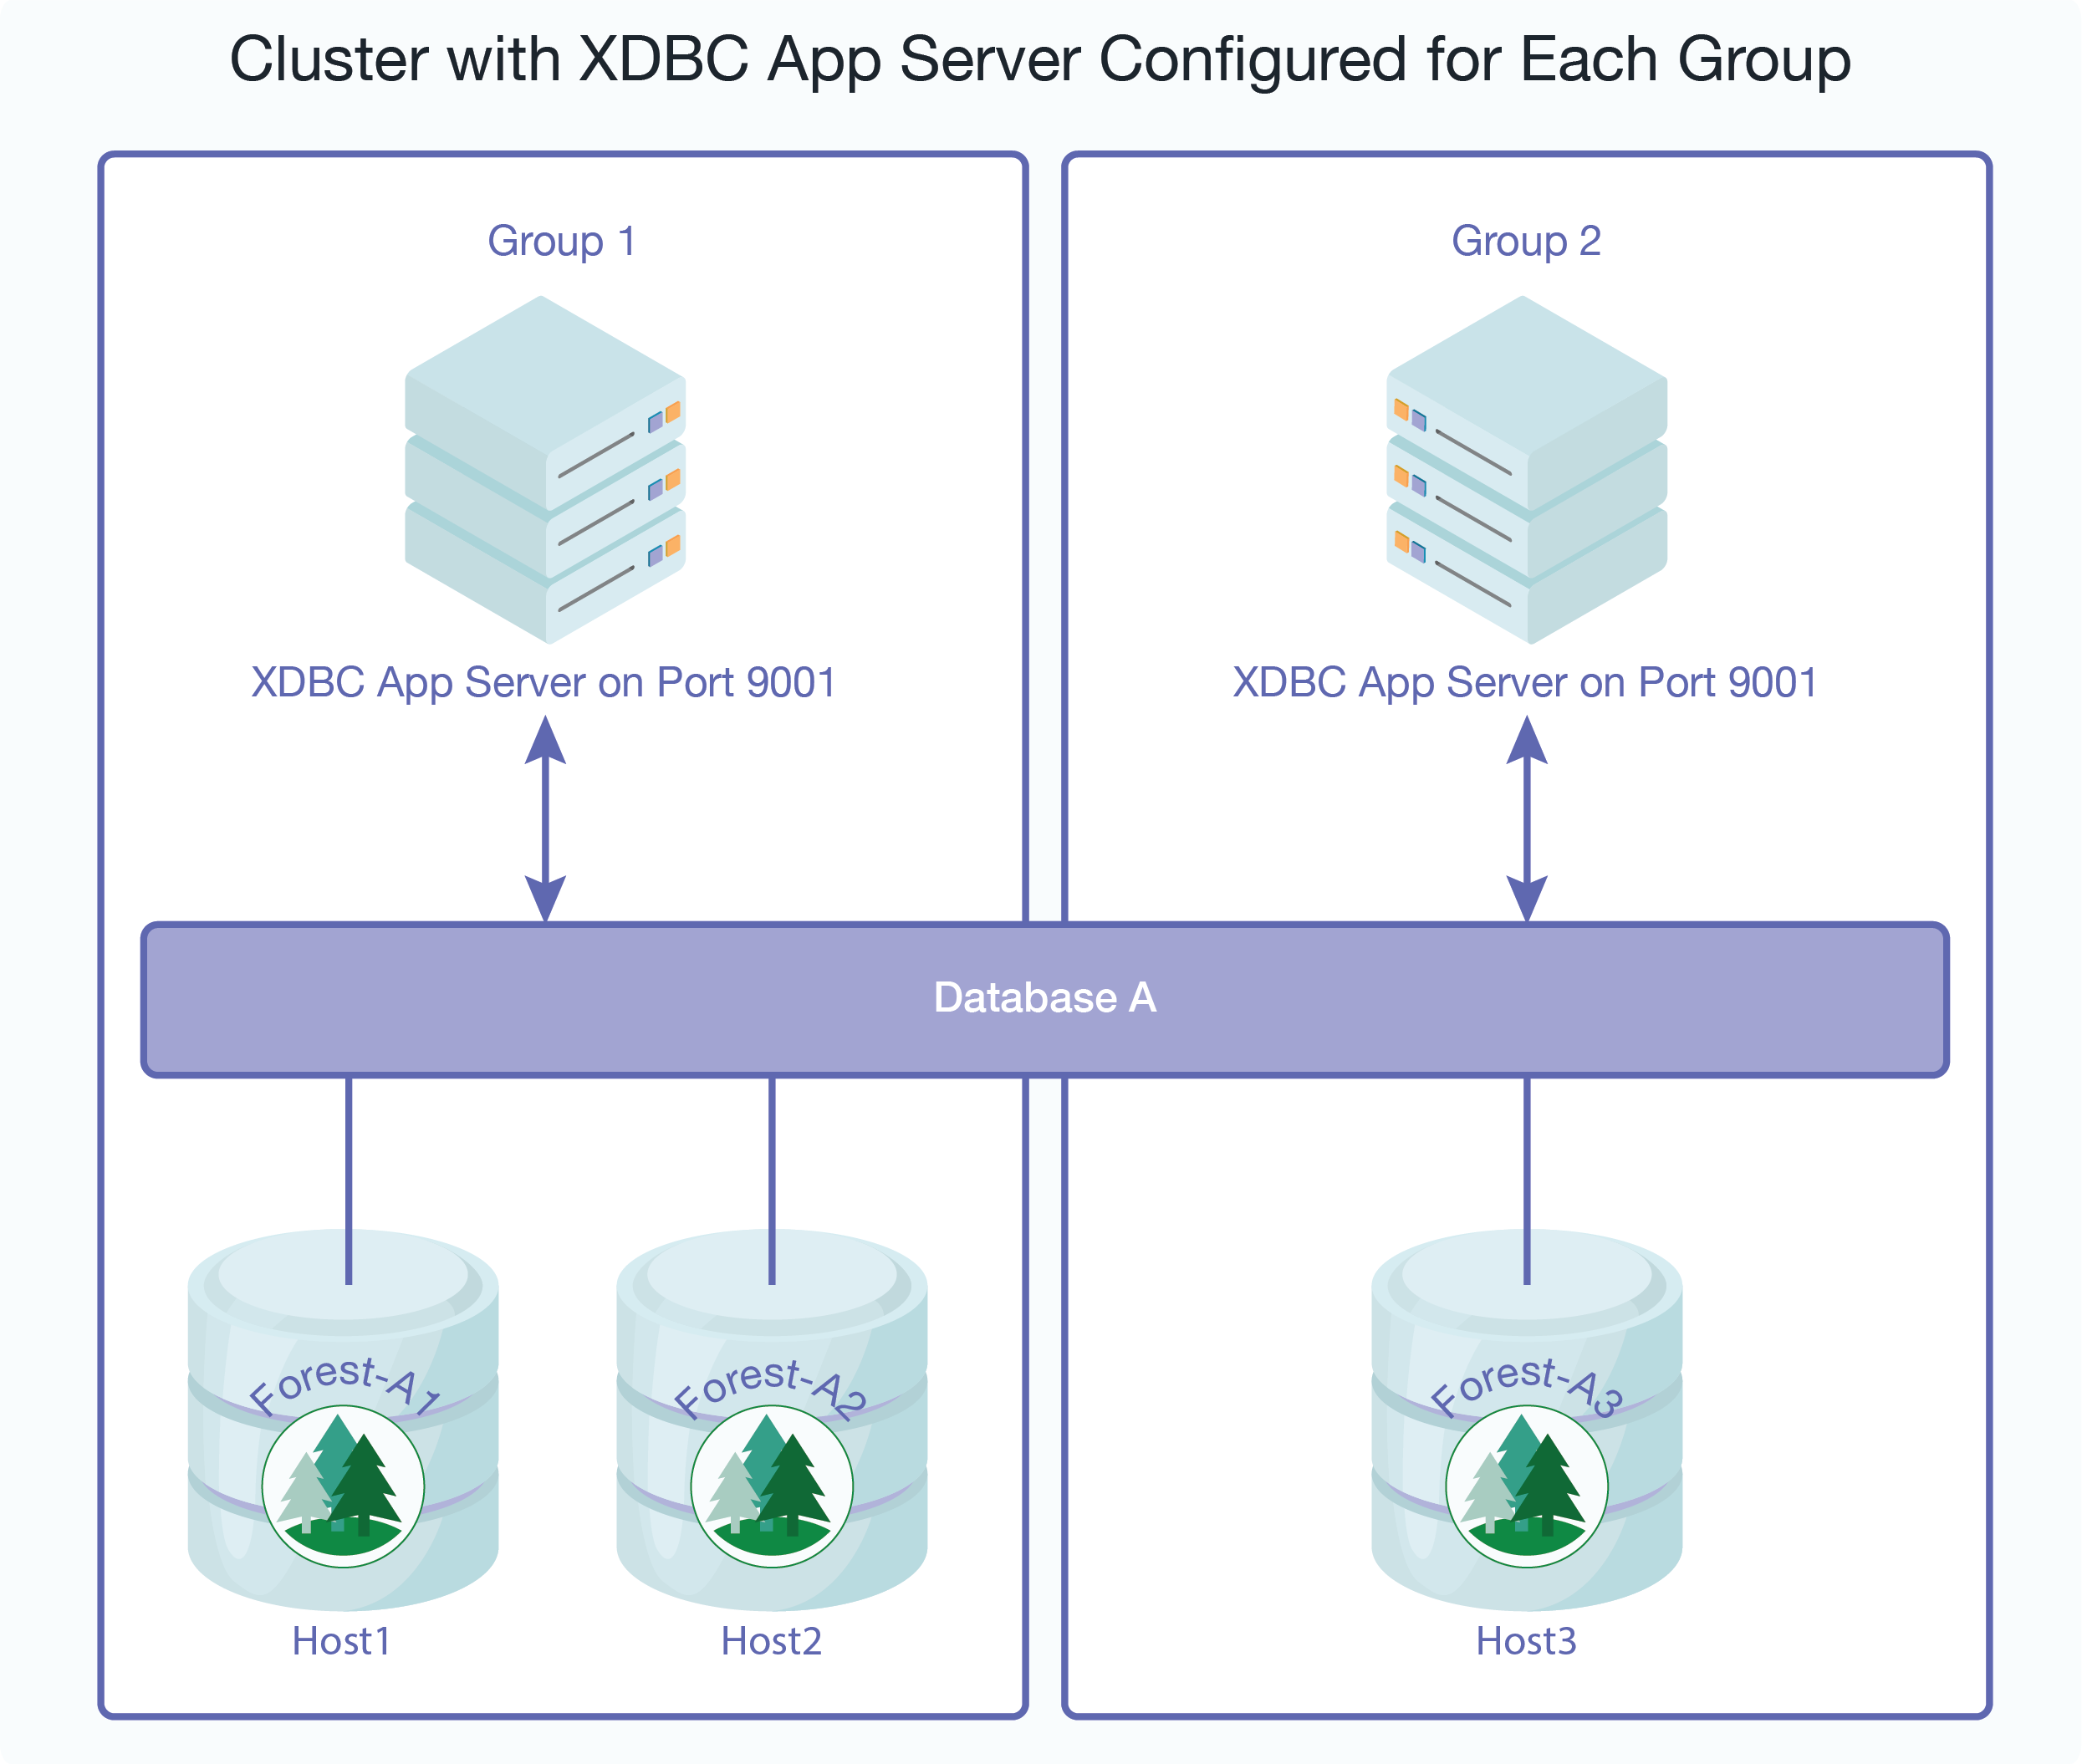 Diagram of Cluster with XDBC App Server Configured for Each Group